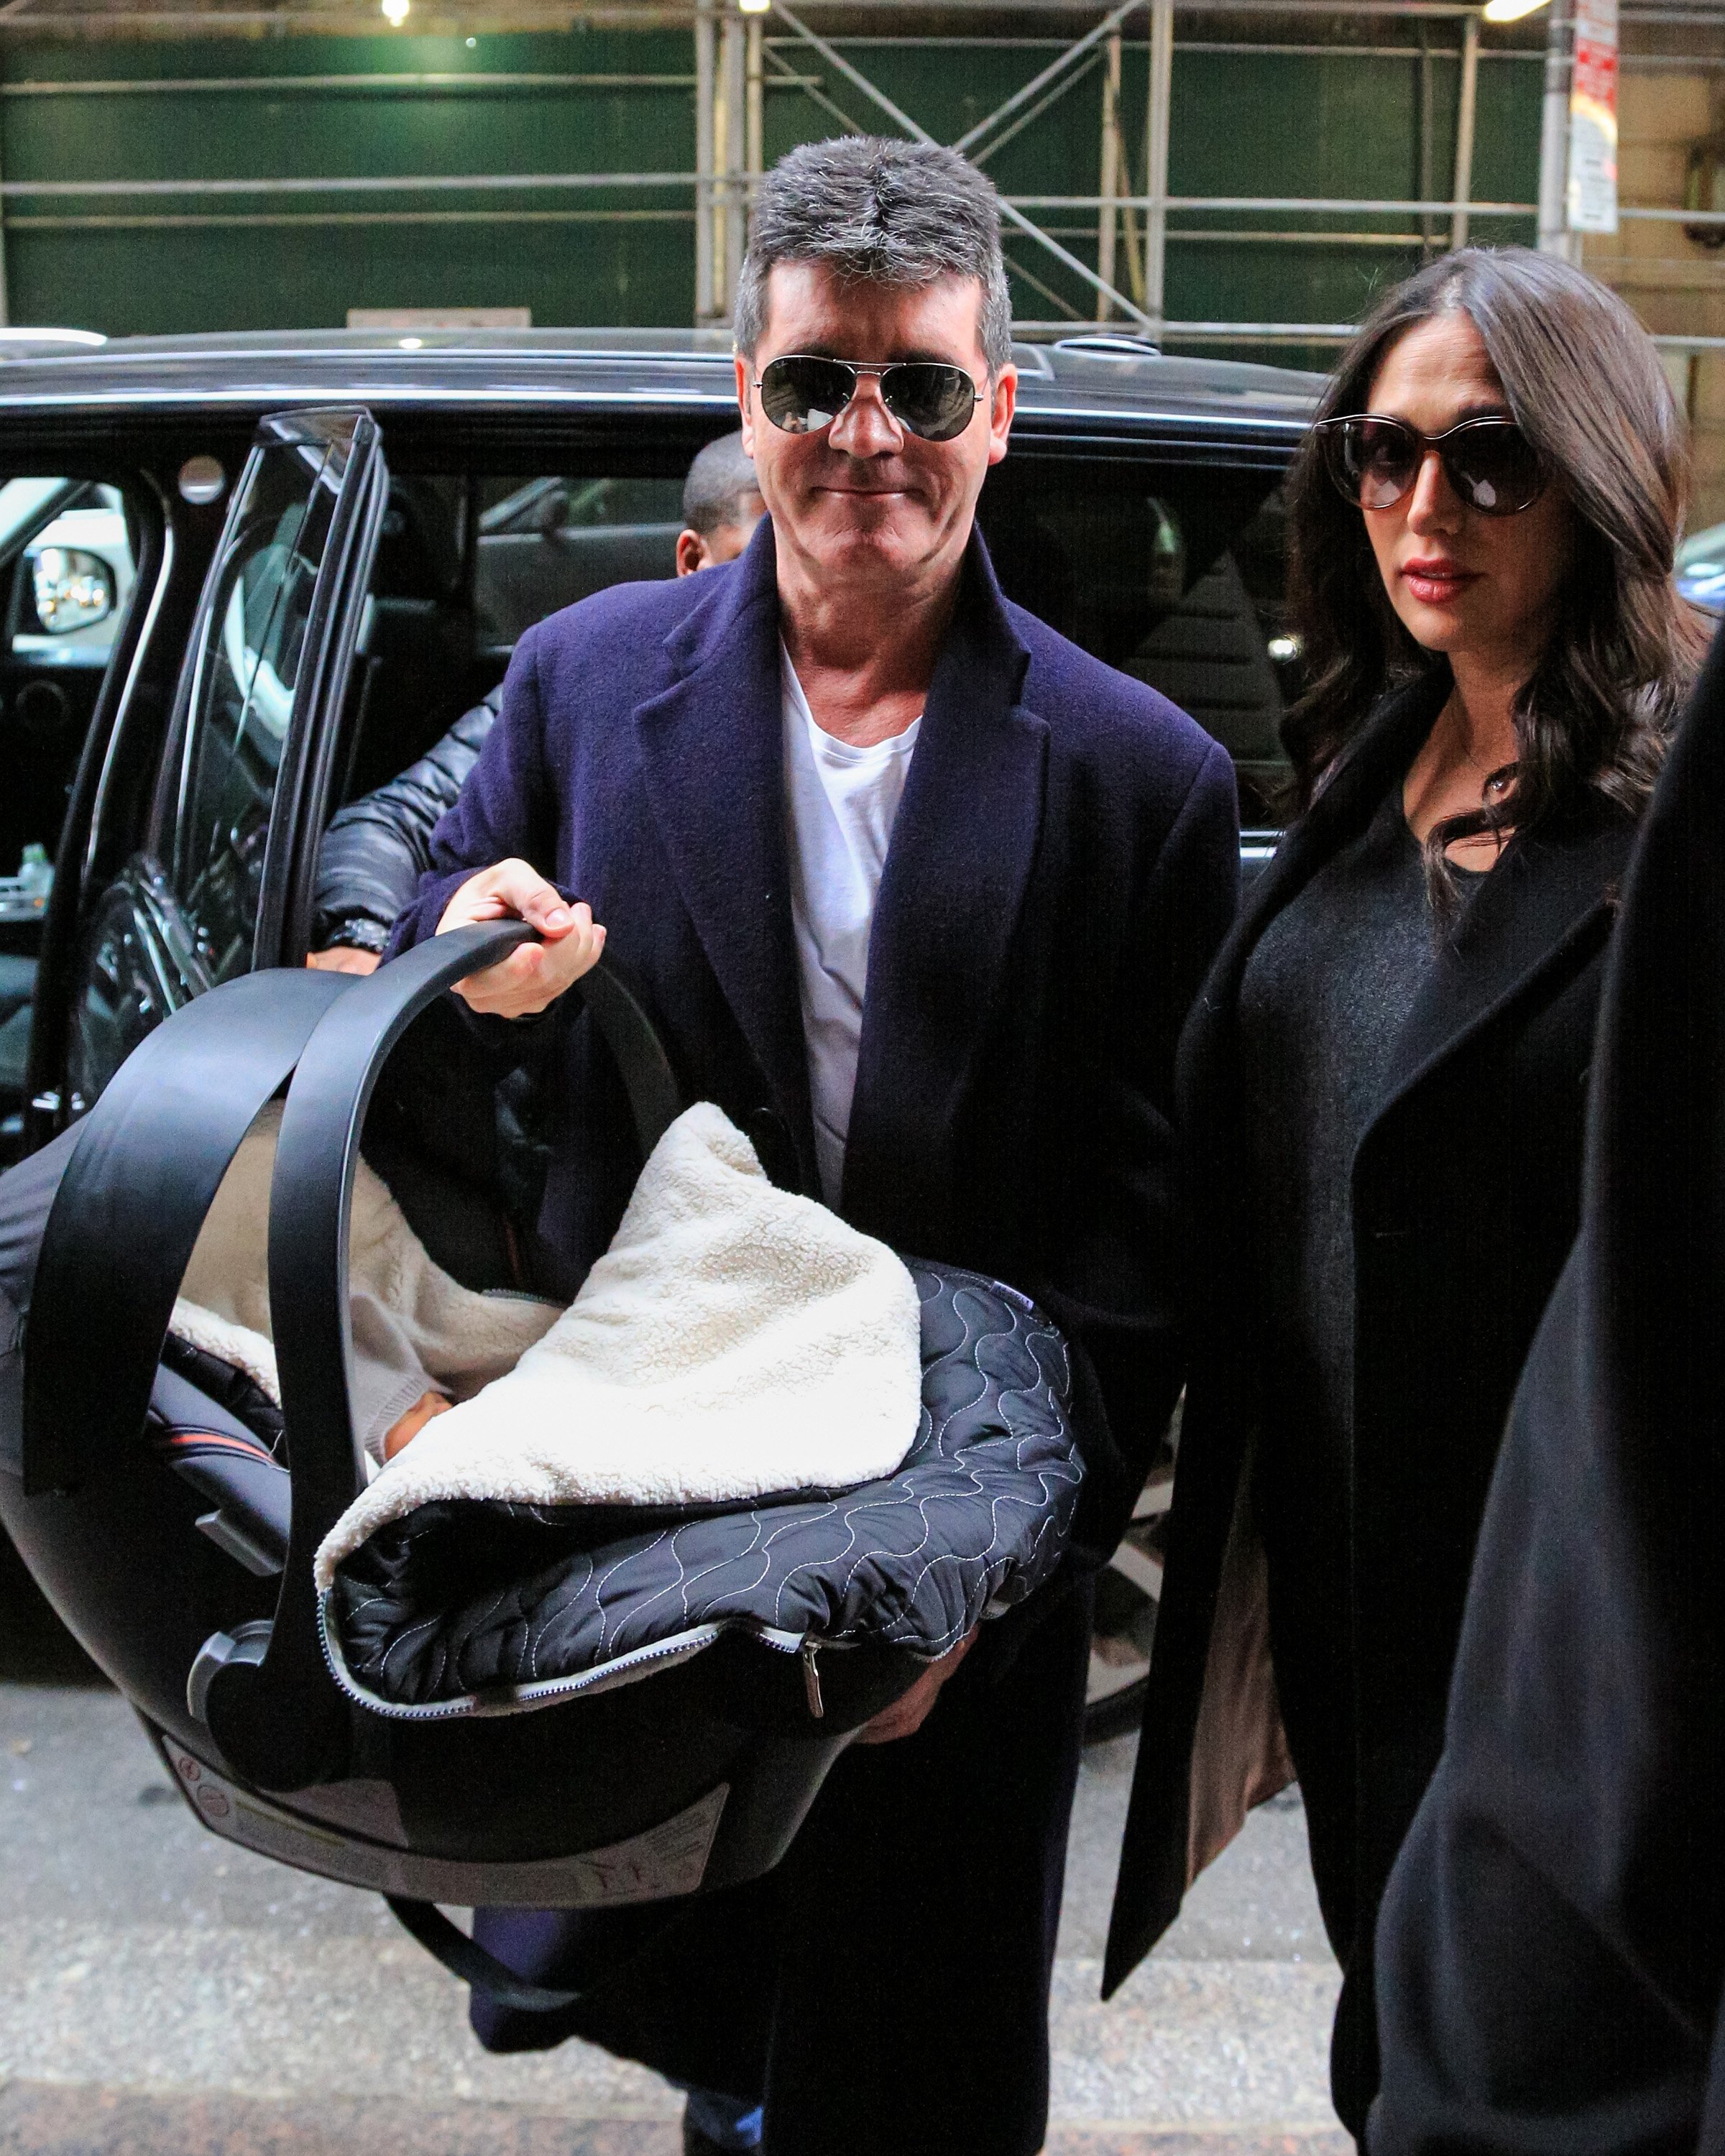 : Simon Cowell with his partner Lauren Silverman and newborn son Eric Cowell are seen arriving at their hotel on February 16, 2014 in New York City | Source: Getty Images